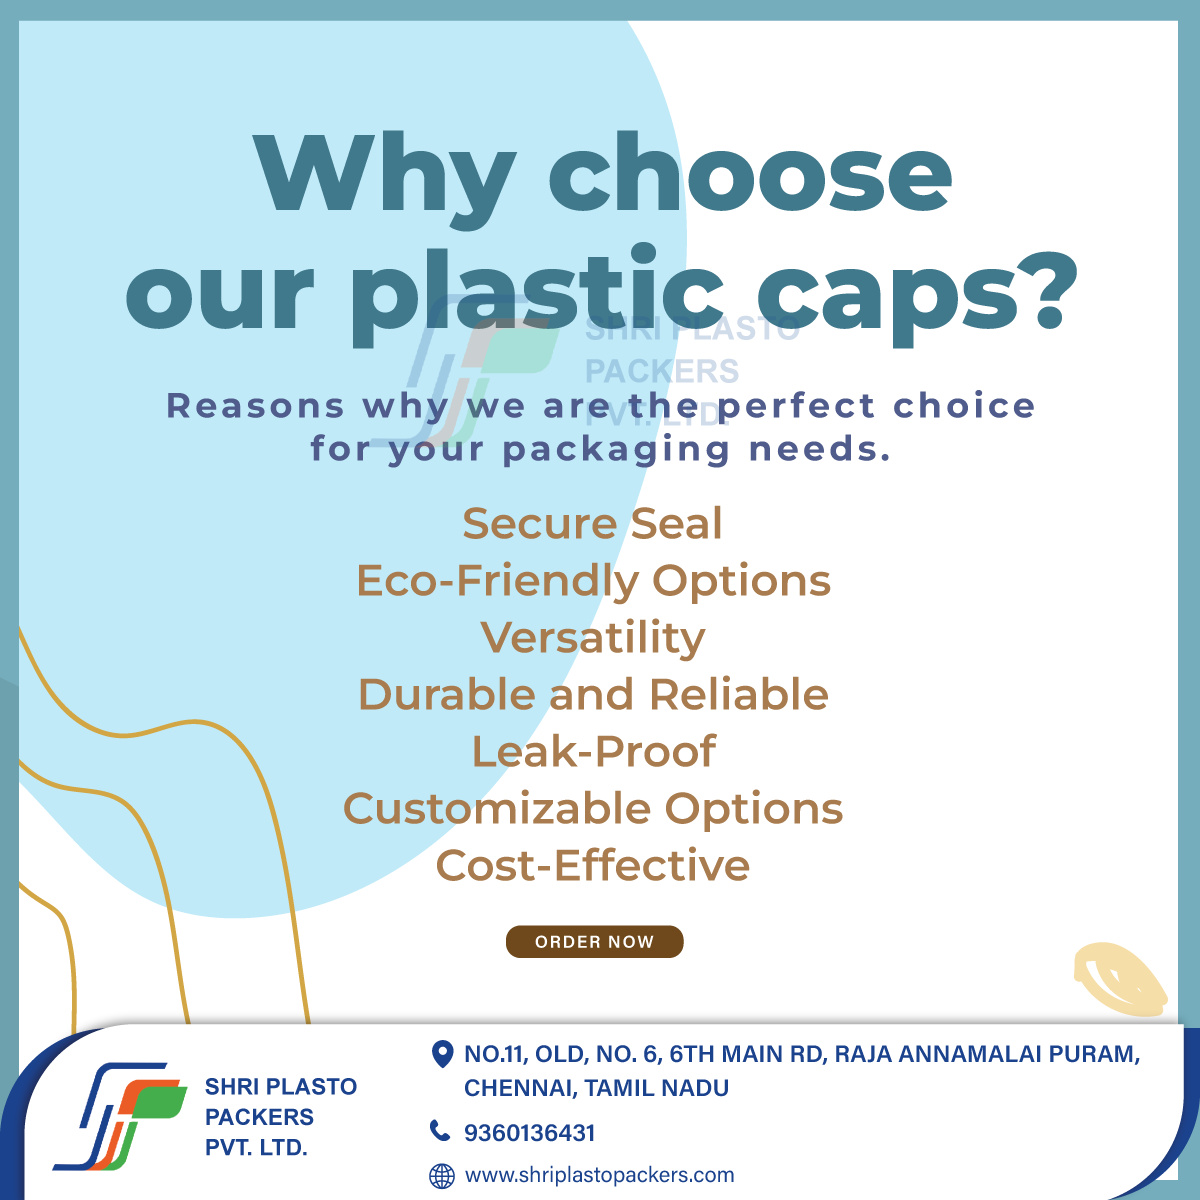 🌟 Looking for top-notch plastic caps? Look no further! Here's why we're your go-to choice for all your packaging needs:
✅ Secure Seal
✅ Eco-Friendly Options
✅ Versatility
✅ Durable and Reliable
✅ Leak-Proof
✅ Customizable Options
✅ Cost Effective
#PackagingPerfection